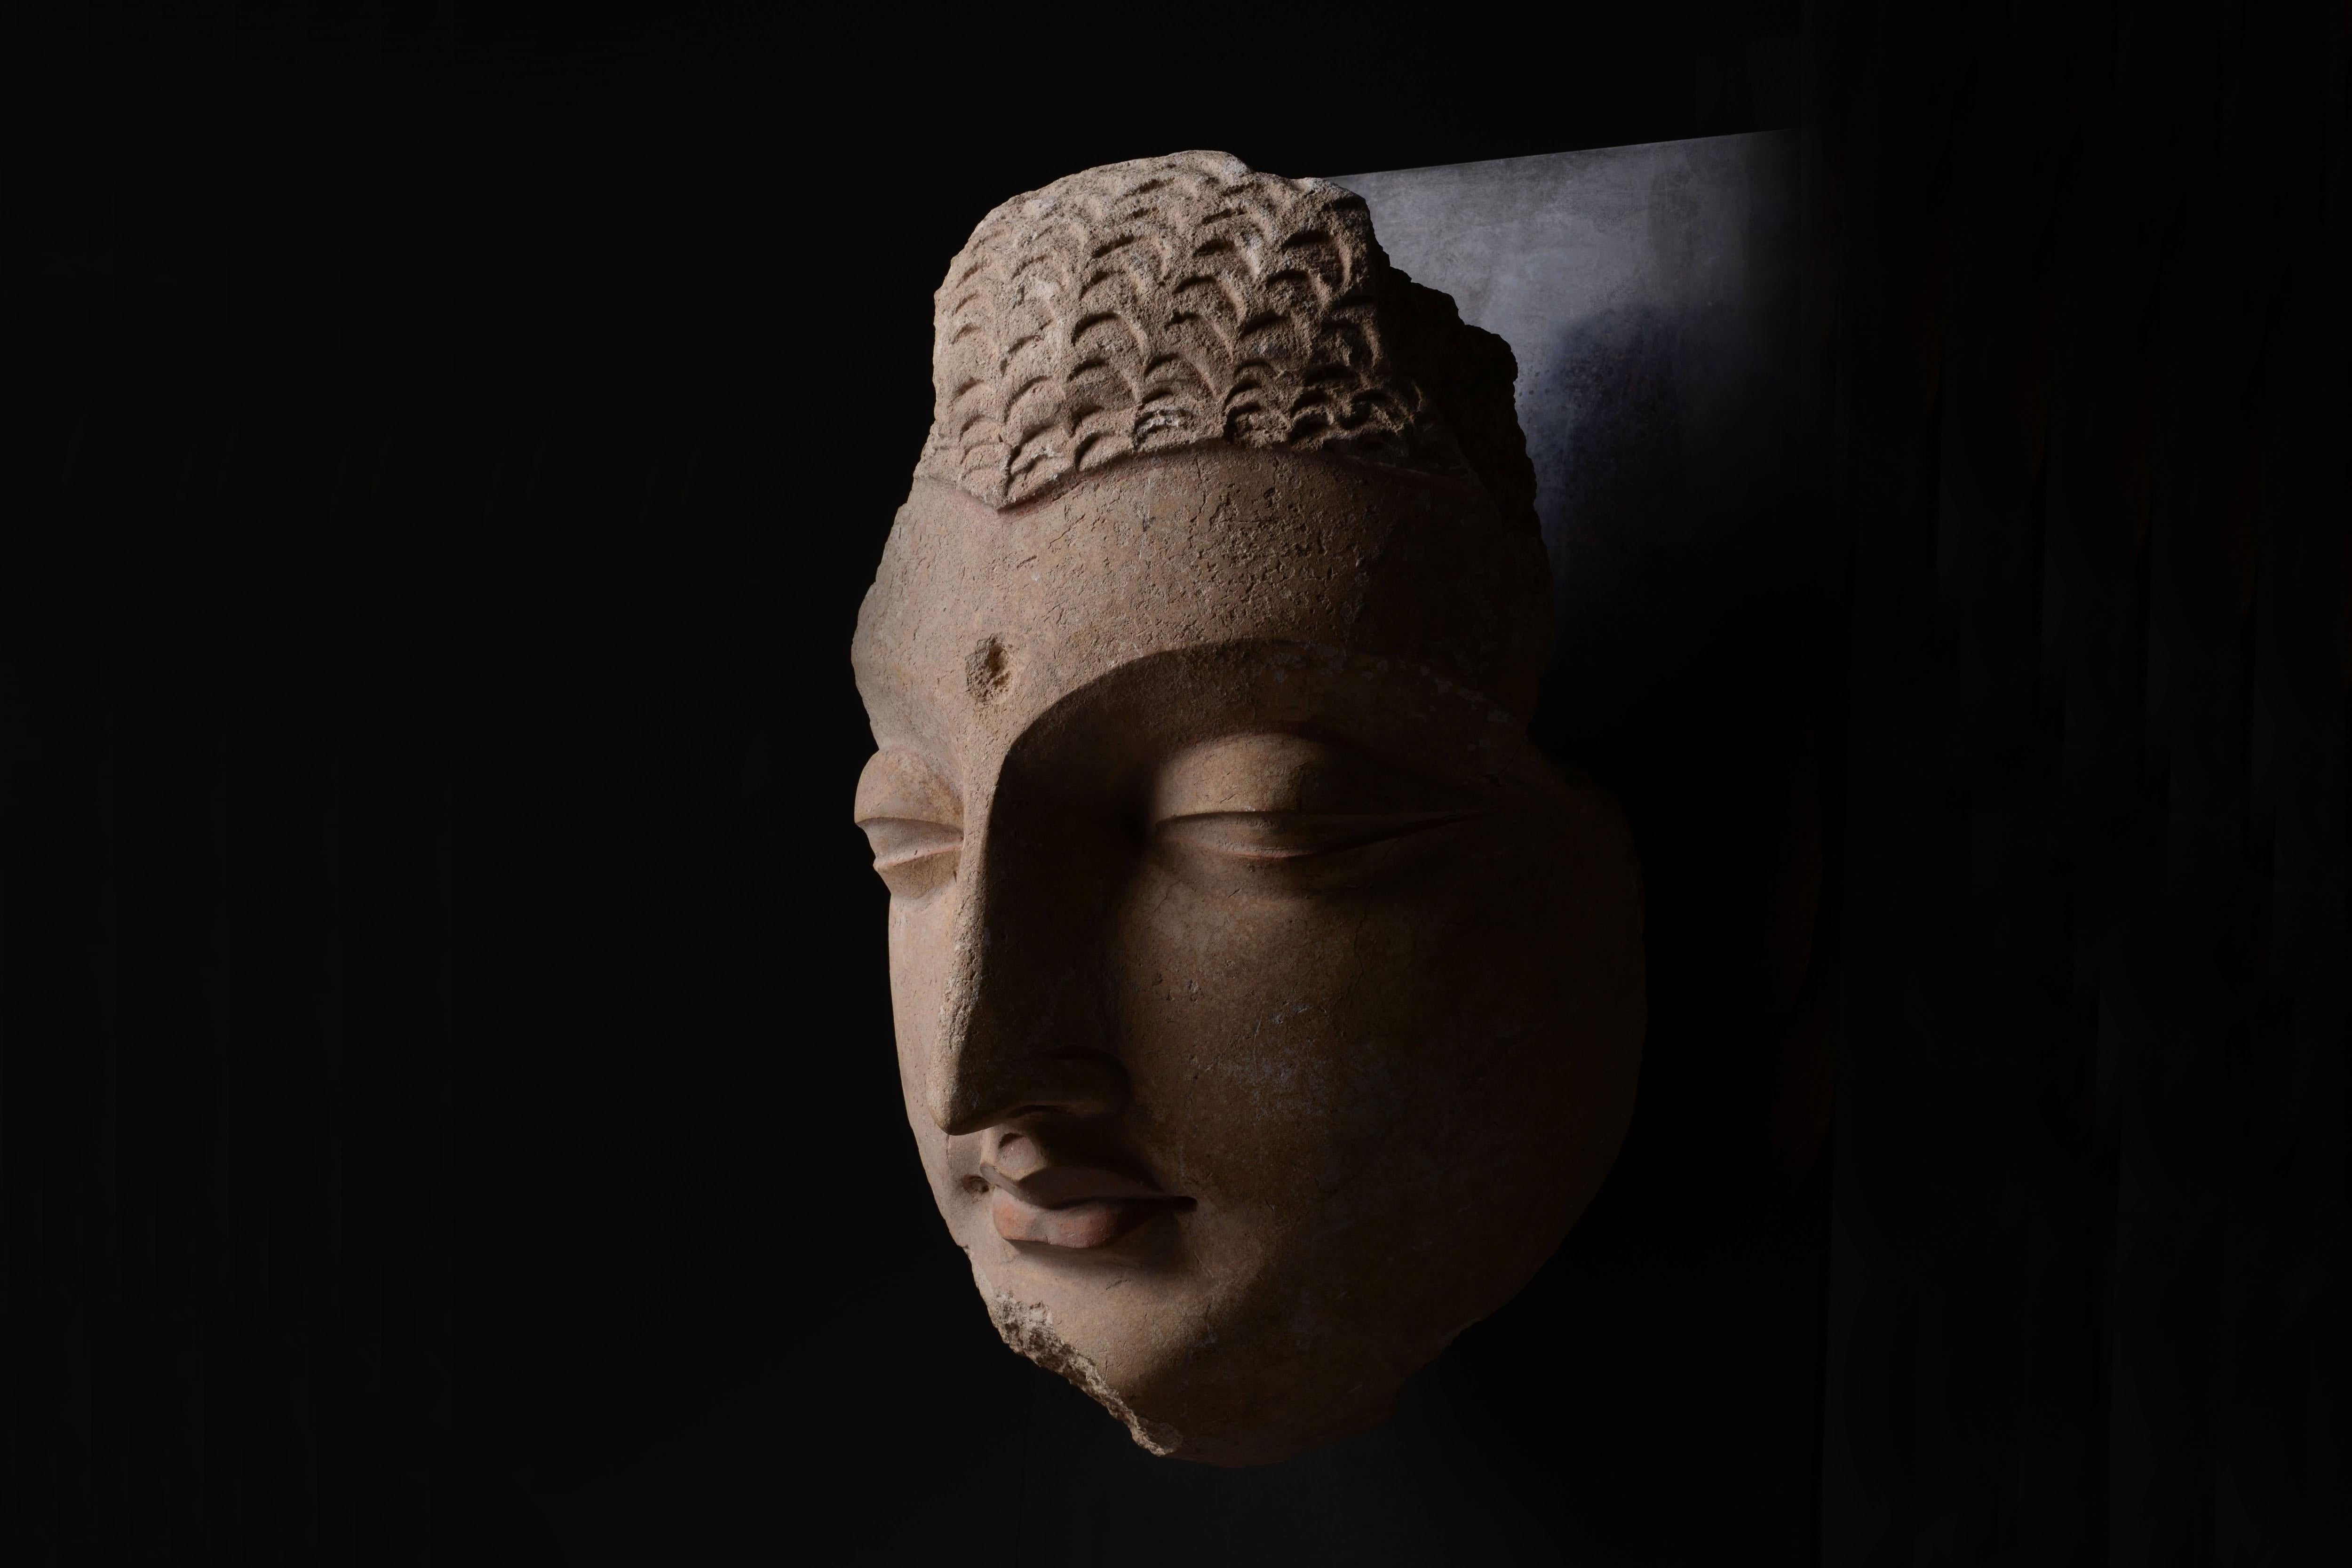 This head of Gautama Buddha, sensuously modelled in stucco, is an exceptional example of Gandharan devotional sculpture. Depicted with large, heavy-lidded eyes, an aquiline nose, and plump red lips, the Buddha exudes serenity and otherworldly